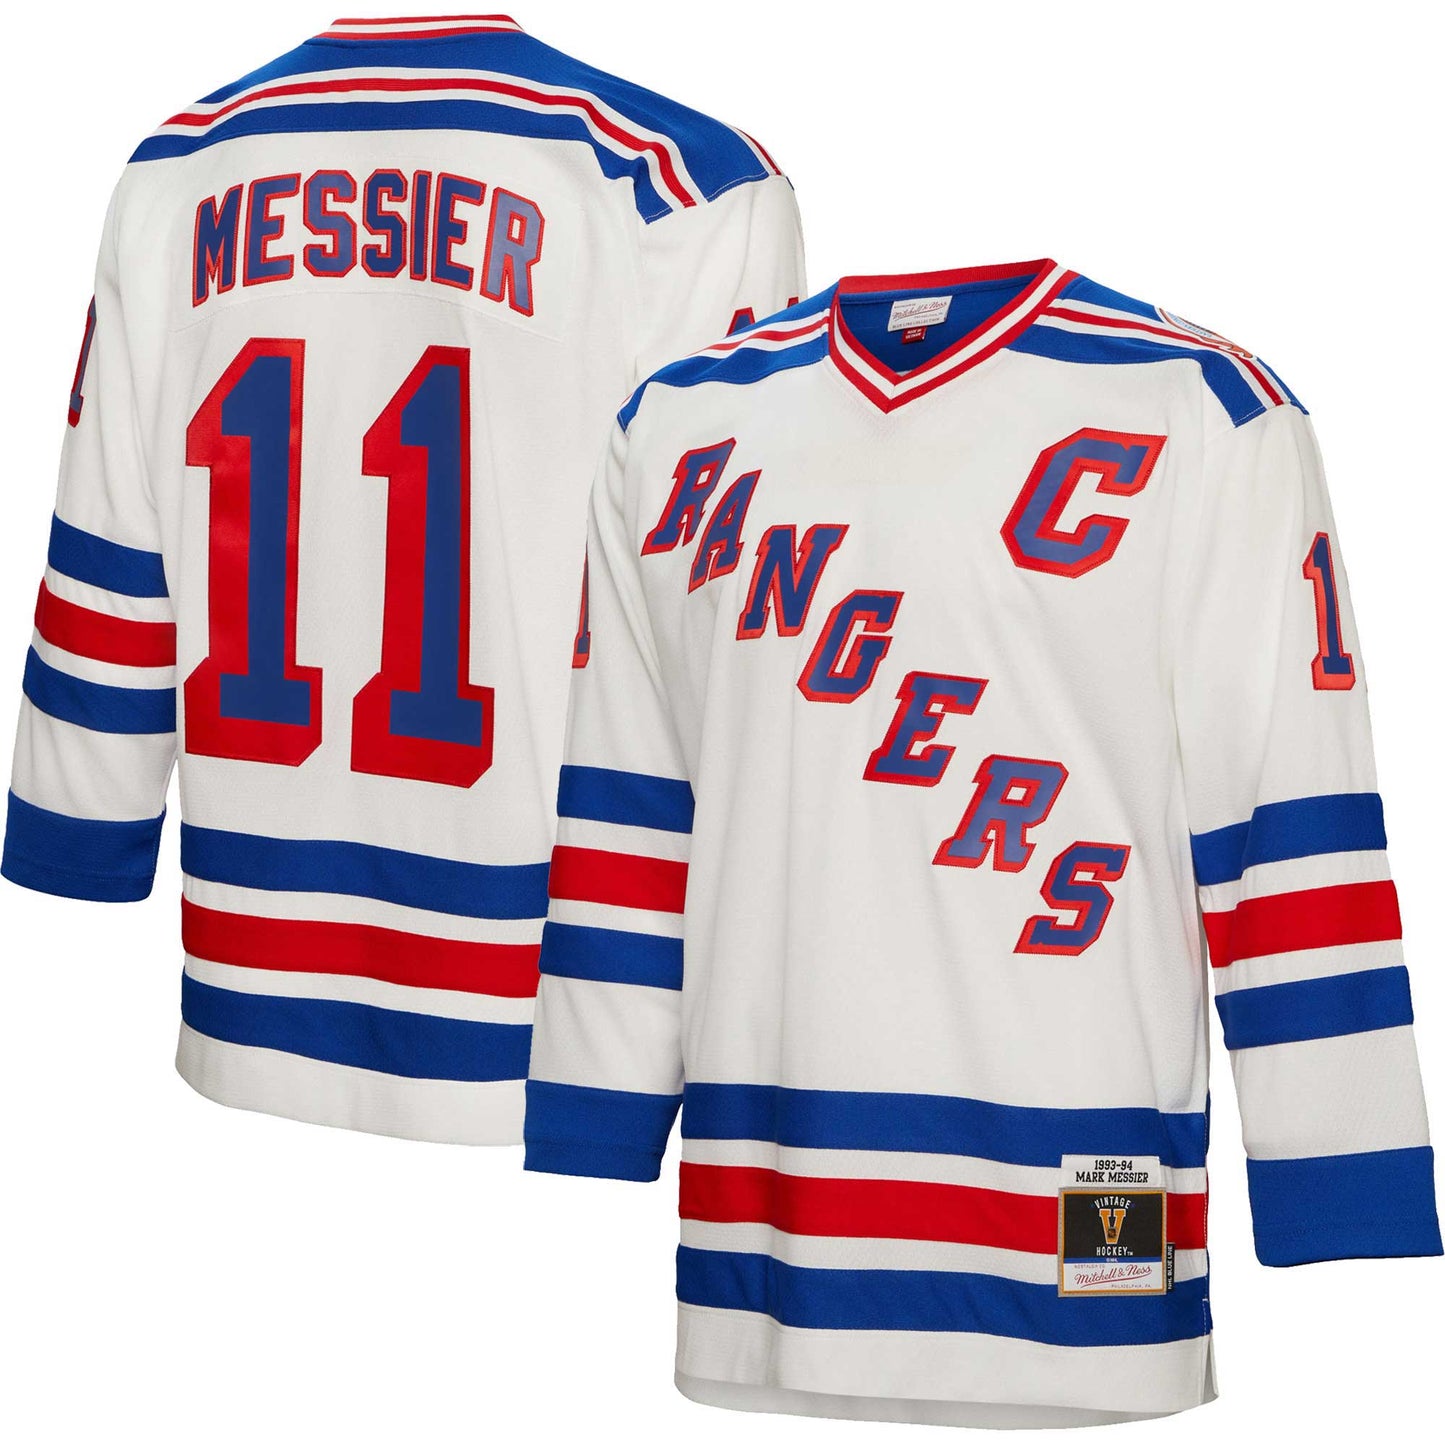 Mark Messier New York Rangers Mitchell & Ness 1993/94 Captain Patch Blue Line Player Jersey - White